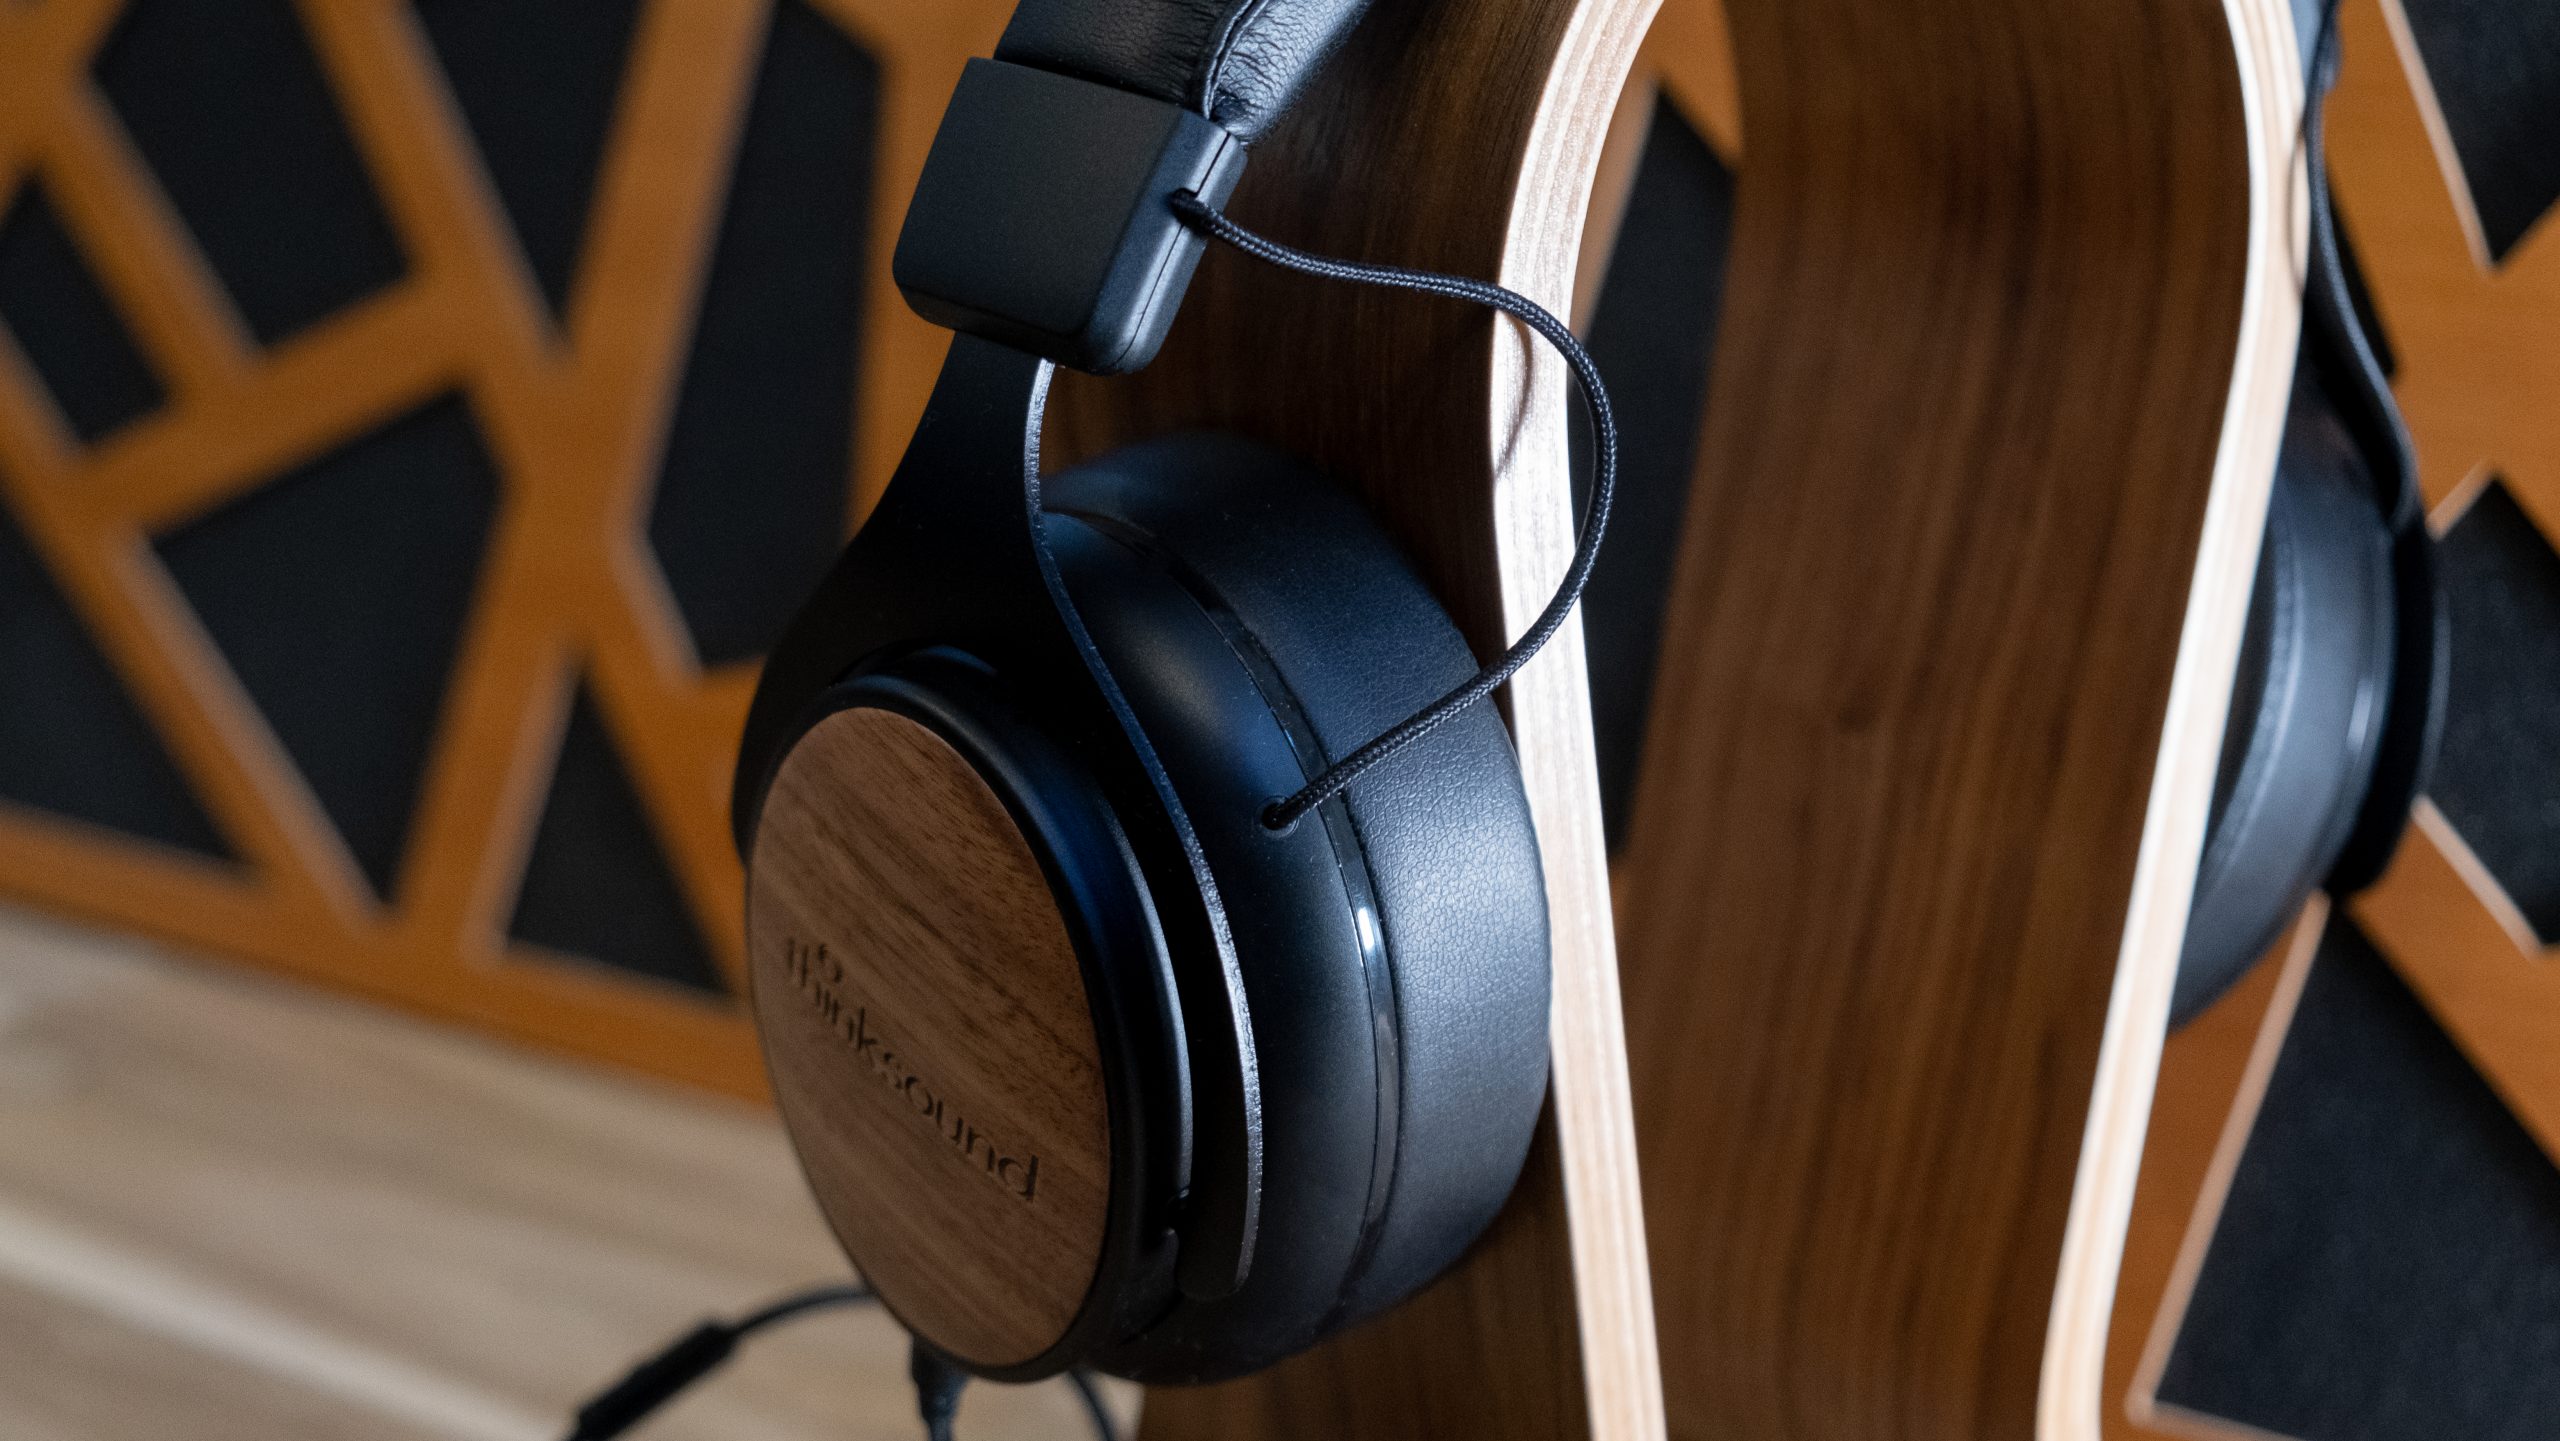 From behind the Thinksound ov21 has visible cabling on a headphone stand.